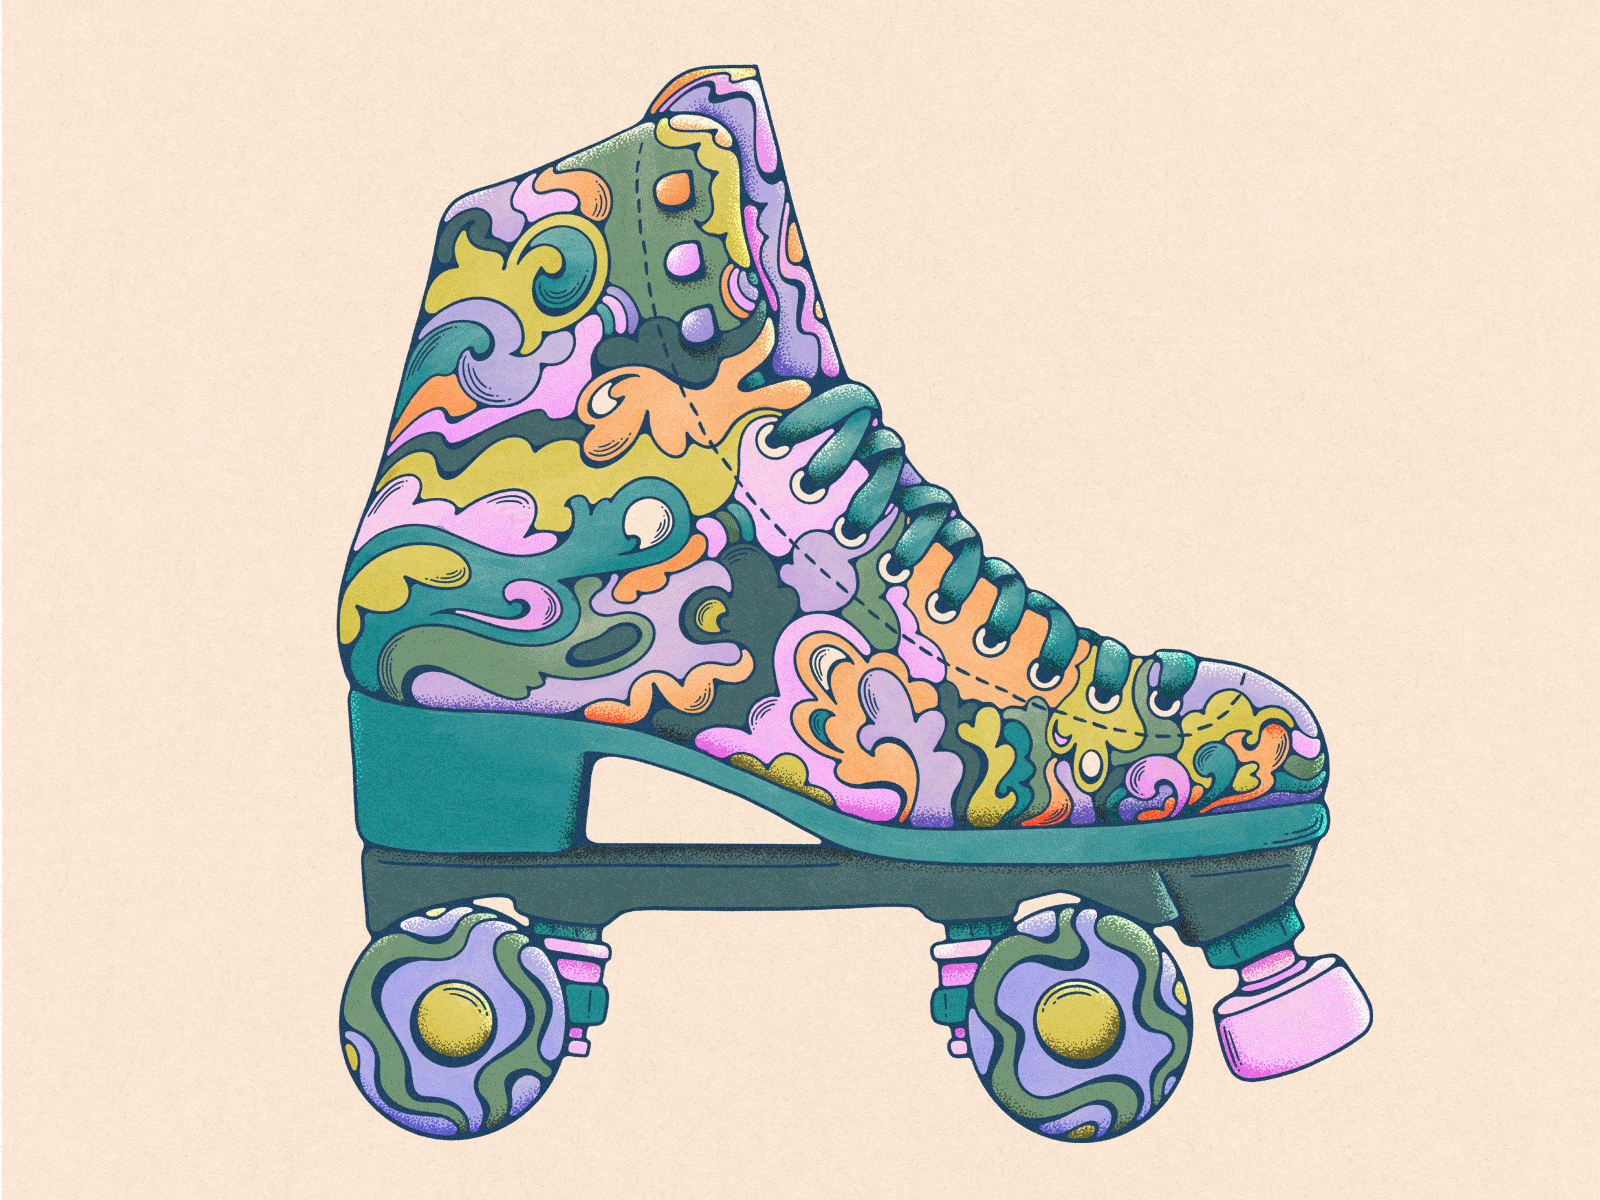 Let the good times roll 70s 80s animate colorful design gif good times groovy illustration kolormarc livelyscout nostalgia procreate psychedelic retro roller skate rollin skate tgts vintage illustration